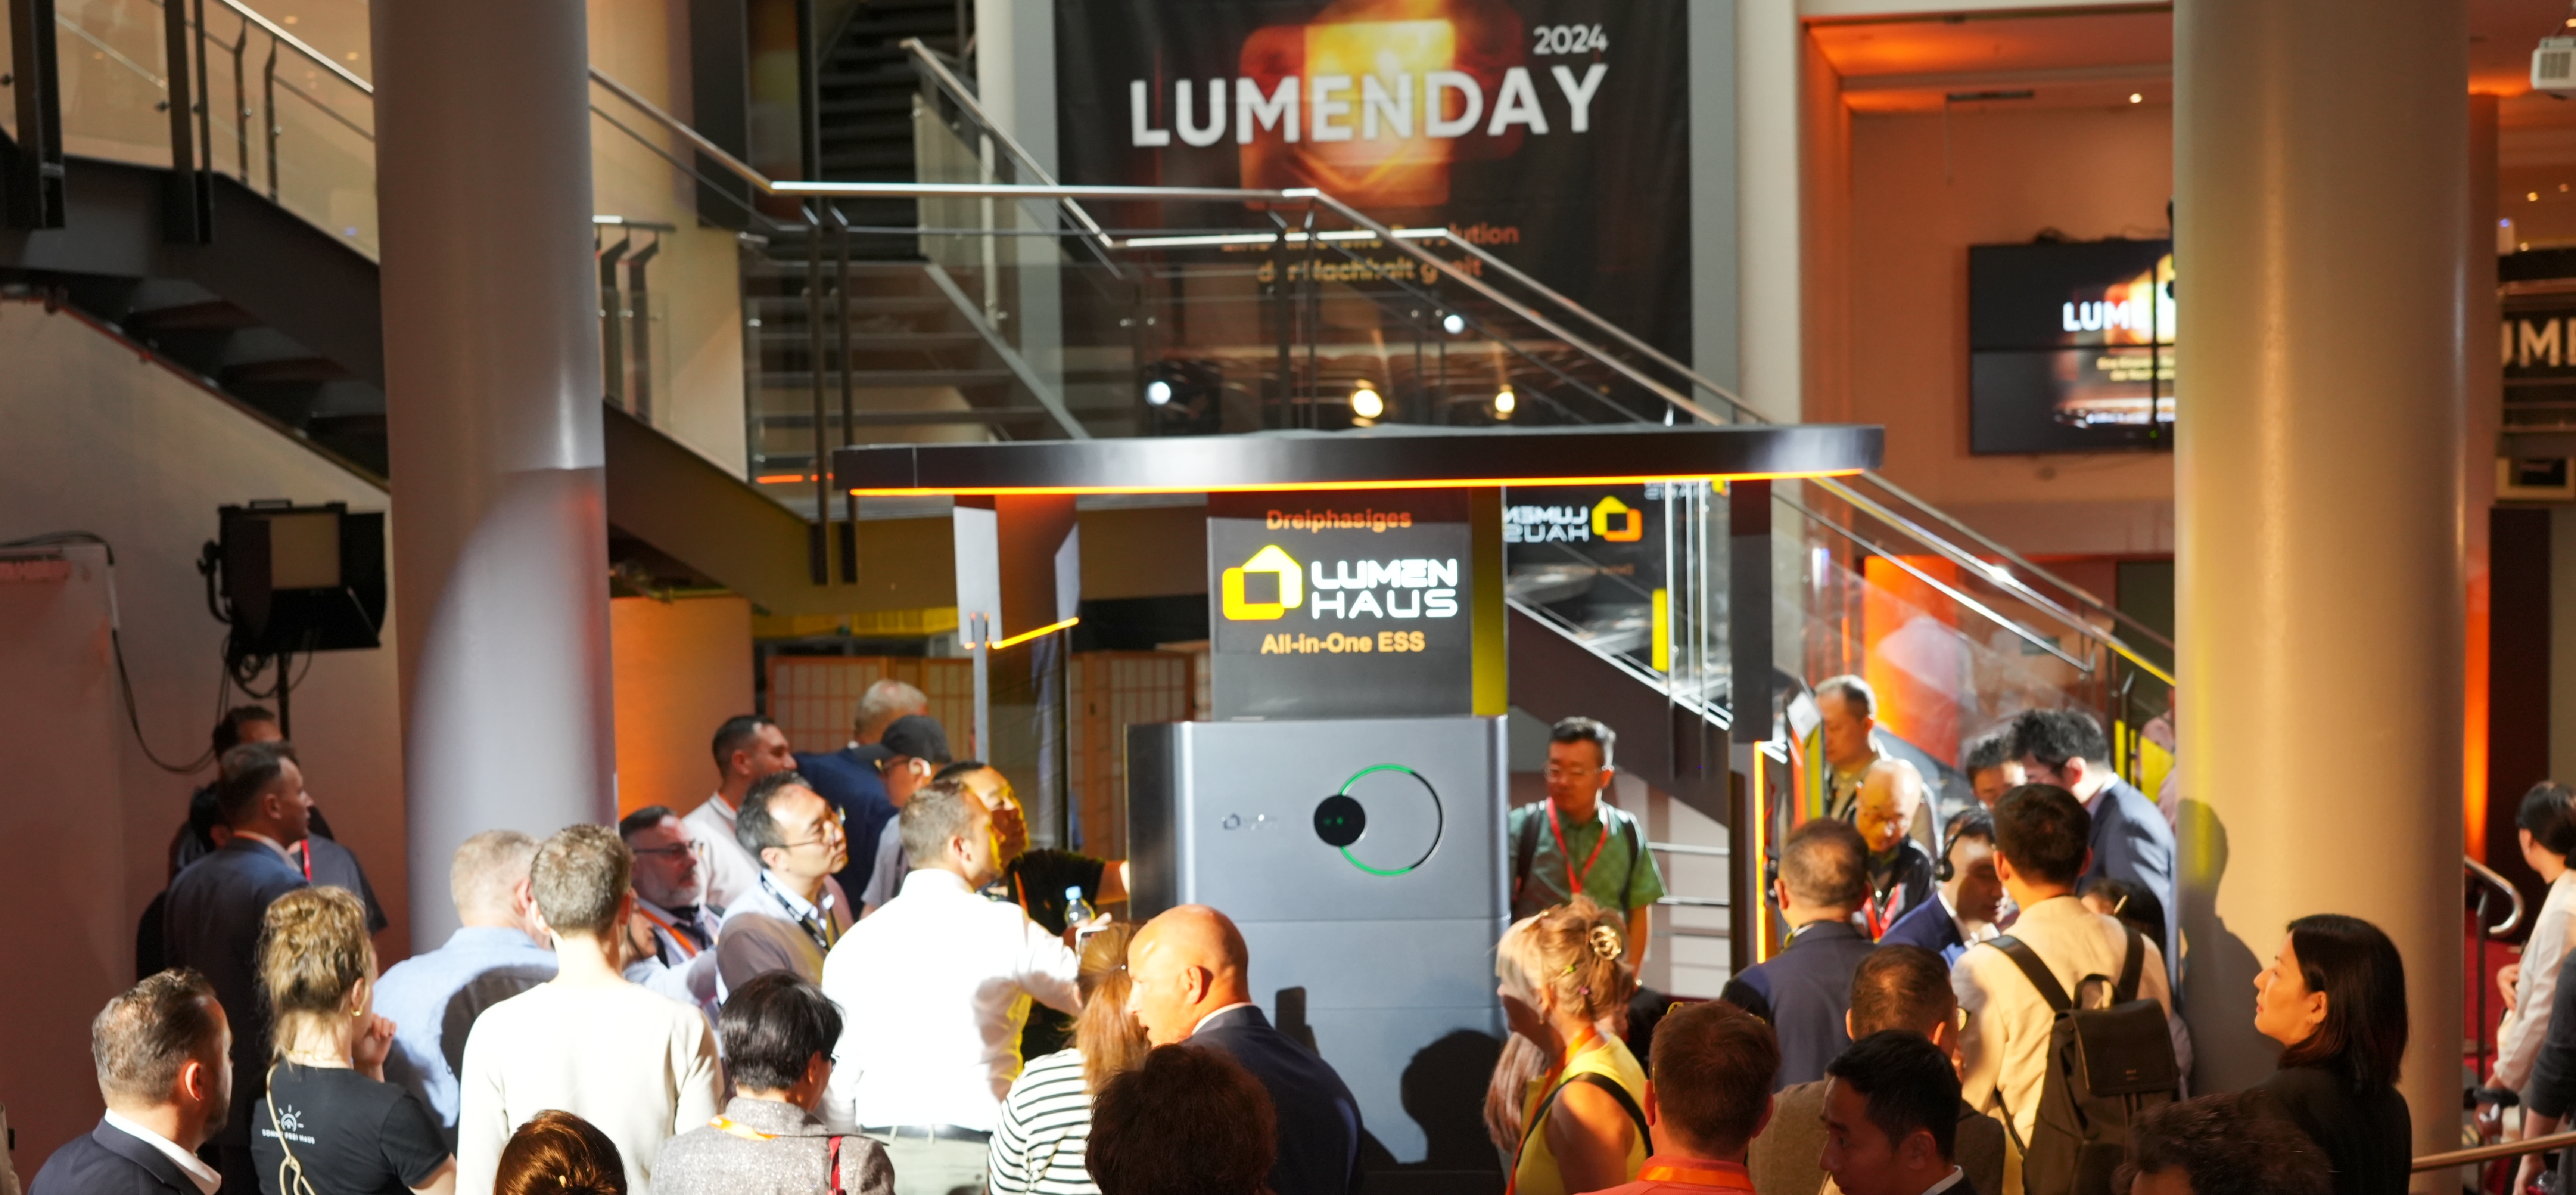 LumenHaus launches innovative sustainable platform and one-stop smart home energy solution 